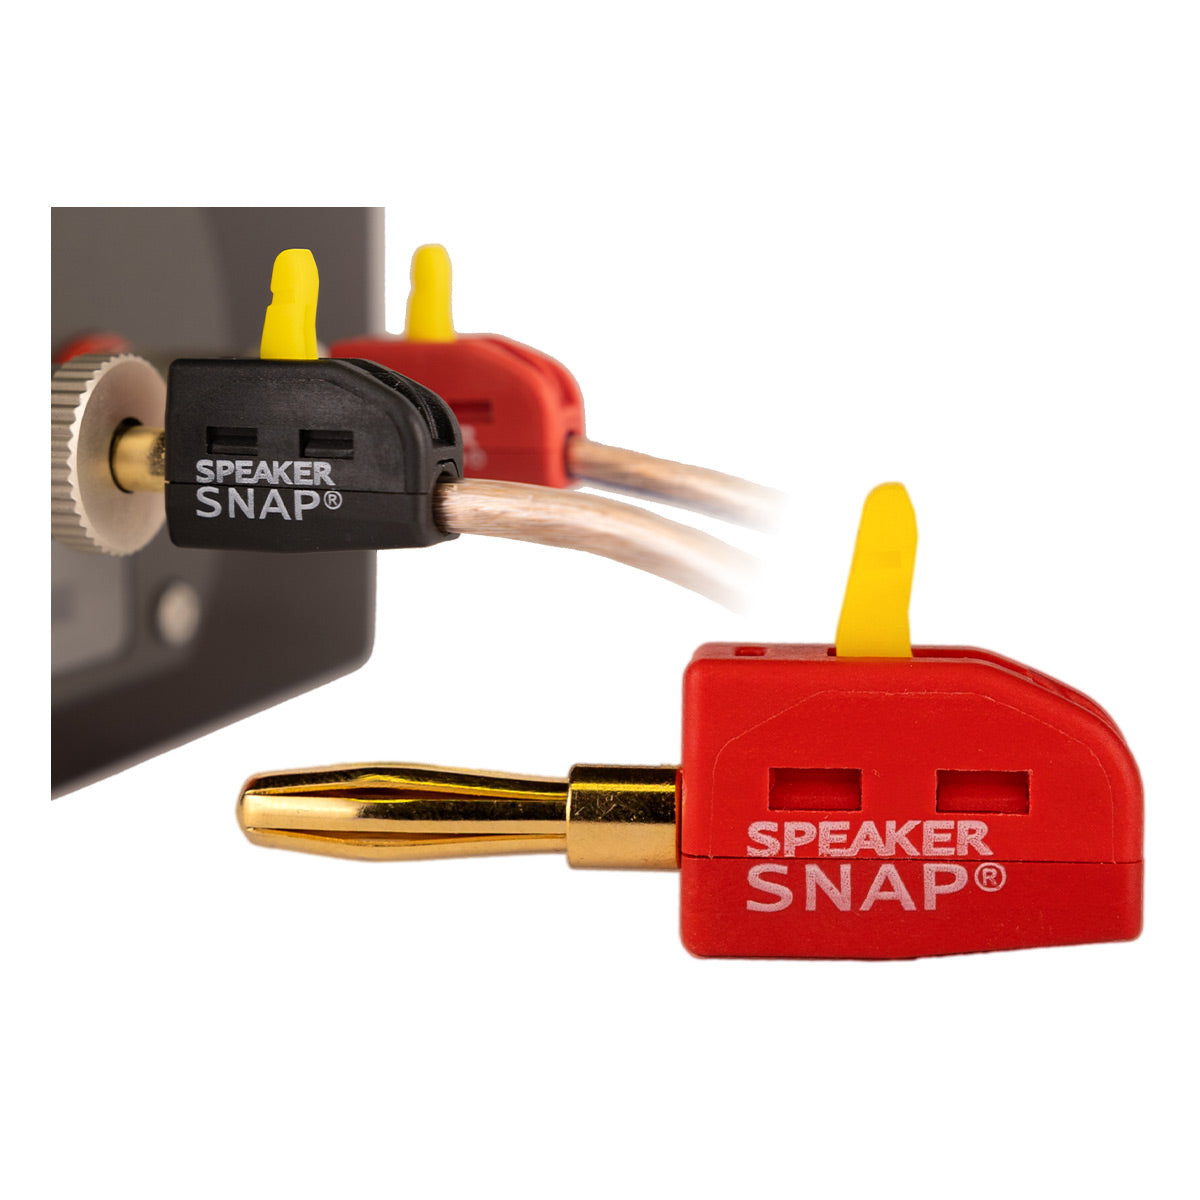 Speaker Snap 100 Count of Fast & Secure Banana Plugs, Gold Plated, 12-24 AWG, for Home Theaters, Speaker Wire, Wall Plates, and Receivers